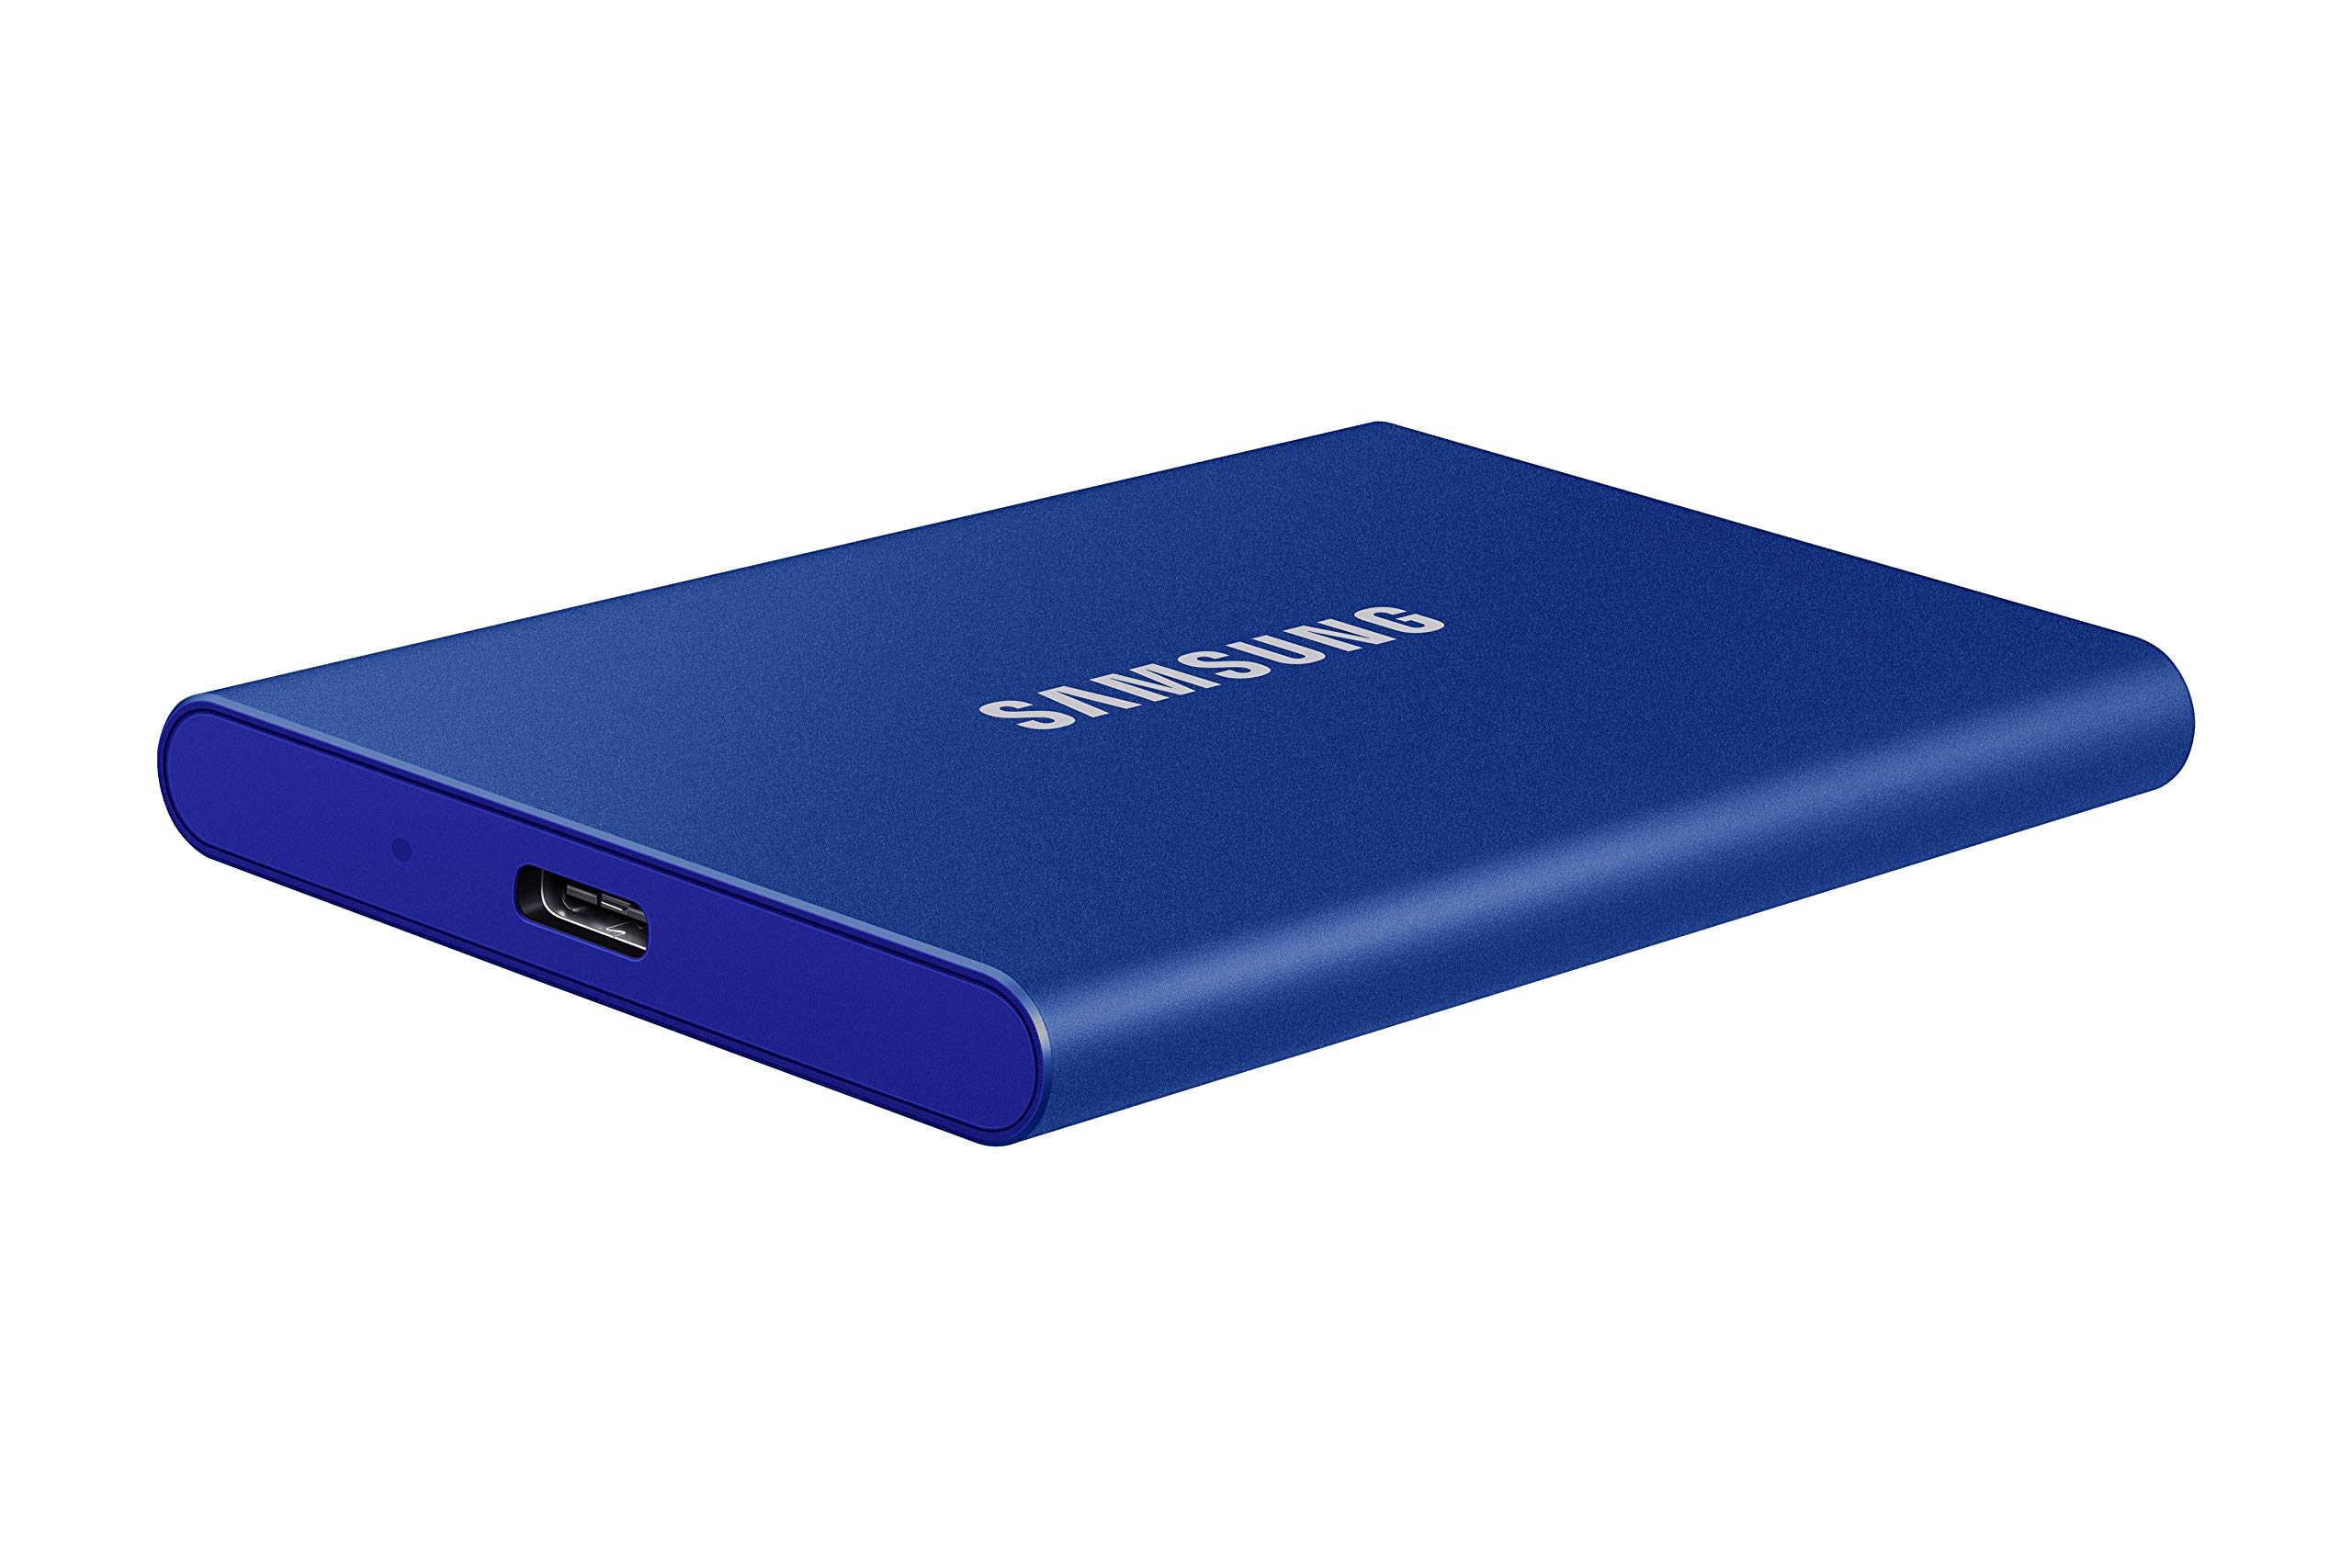 SAMSUNG T7 2TB, Portable SSD + 2mo Adobe CC Photography, up to 1050MB/s, USB 3.2 Gen2, Gaming, Students & Professionals, External Solid State Drive (MU-PC2T0H/AM), Blue